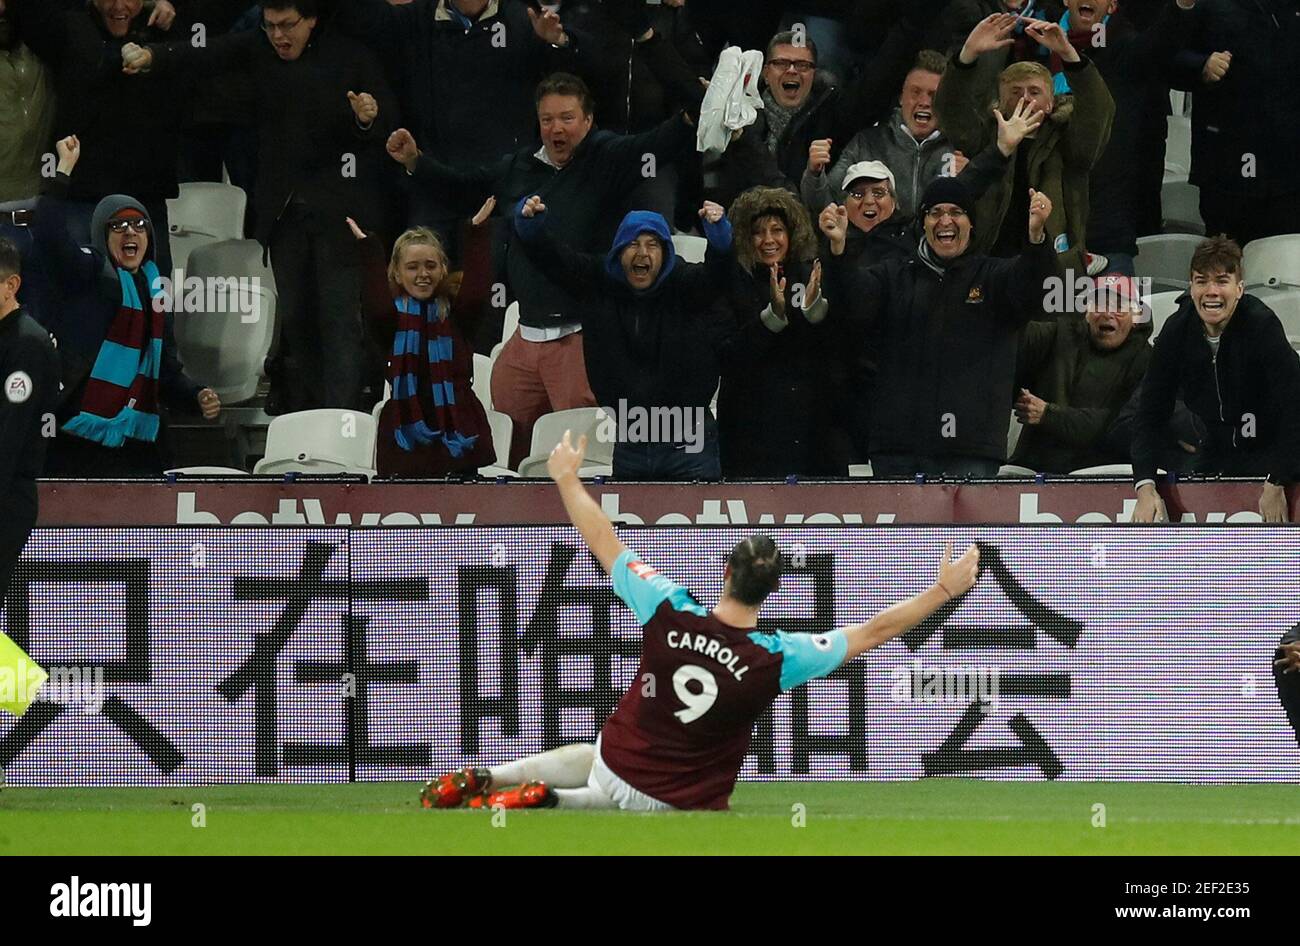 Soccer Football - Premier League - West Ham United vs West Bromwich Albion - London Stadium, London, Britain - January 2, 2018   West Ham United's Andy Carroll celebrates scoring their second goal   REUTERS/Eddie Keogh    EDITORIAL USE ONLY. No use with unauthorized audio, video, data, fixture lists, club/league logos or 'live' services. Online in-match use limited to 75 images, no video emulation. No use in betting, games or single club/league/player publications.  Please contact your account representative for further details. Stock Photo